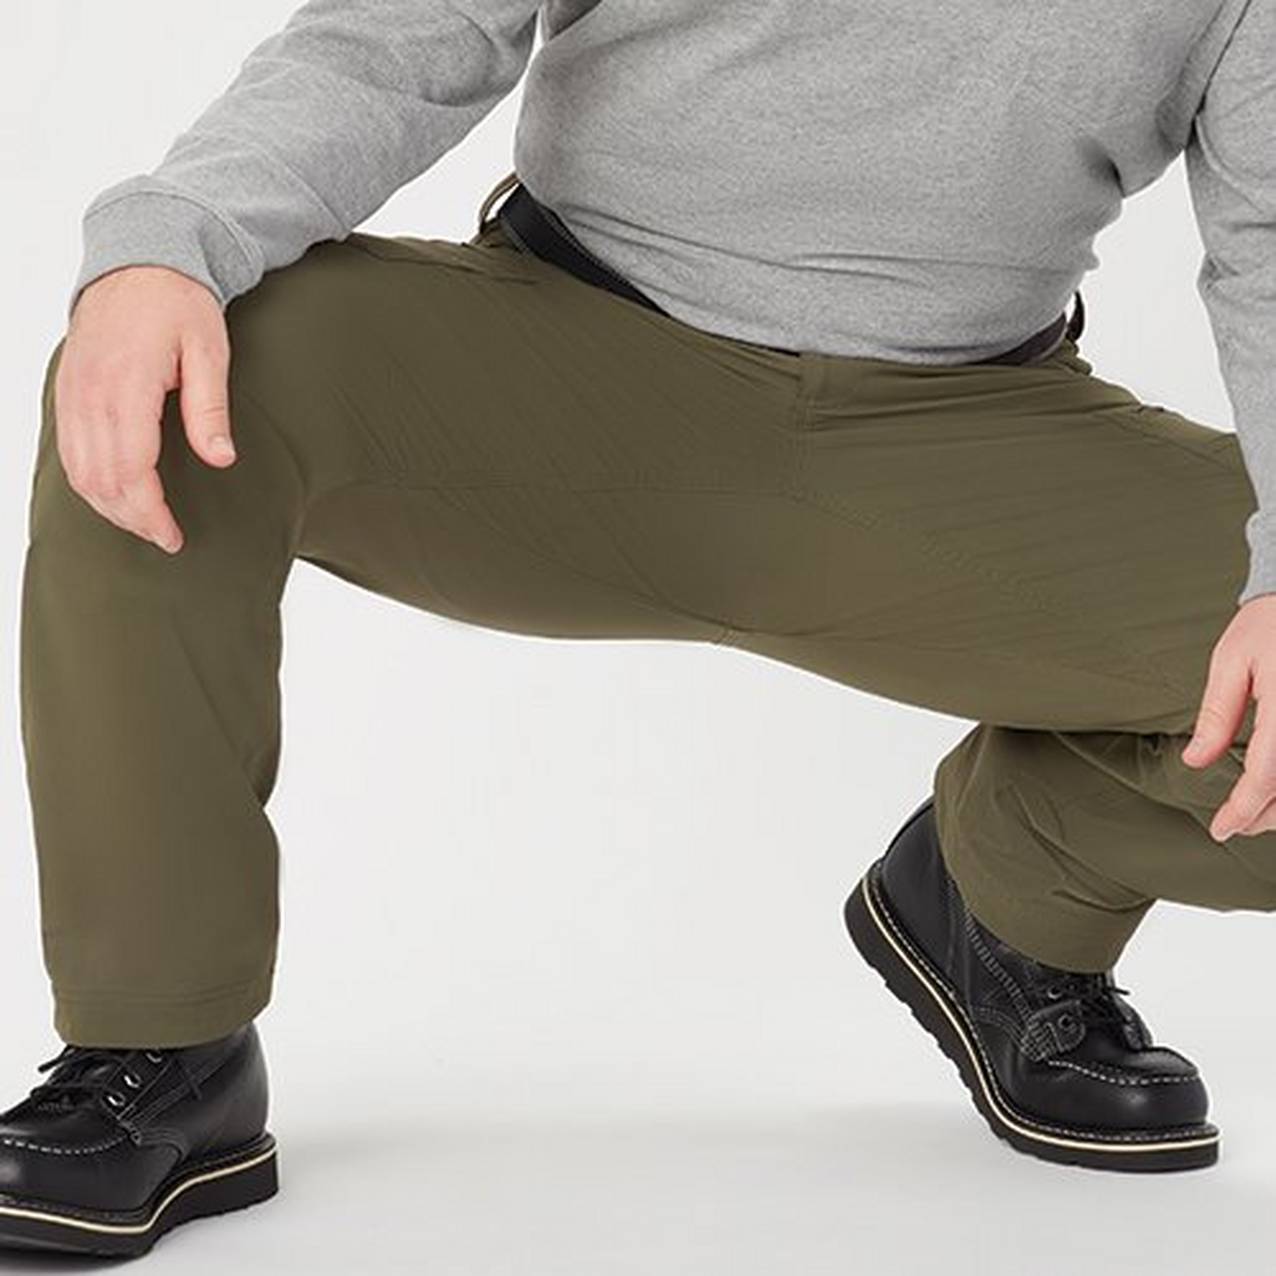 Close up of a man crouching down to show the free range of motion in the pants worn